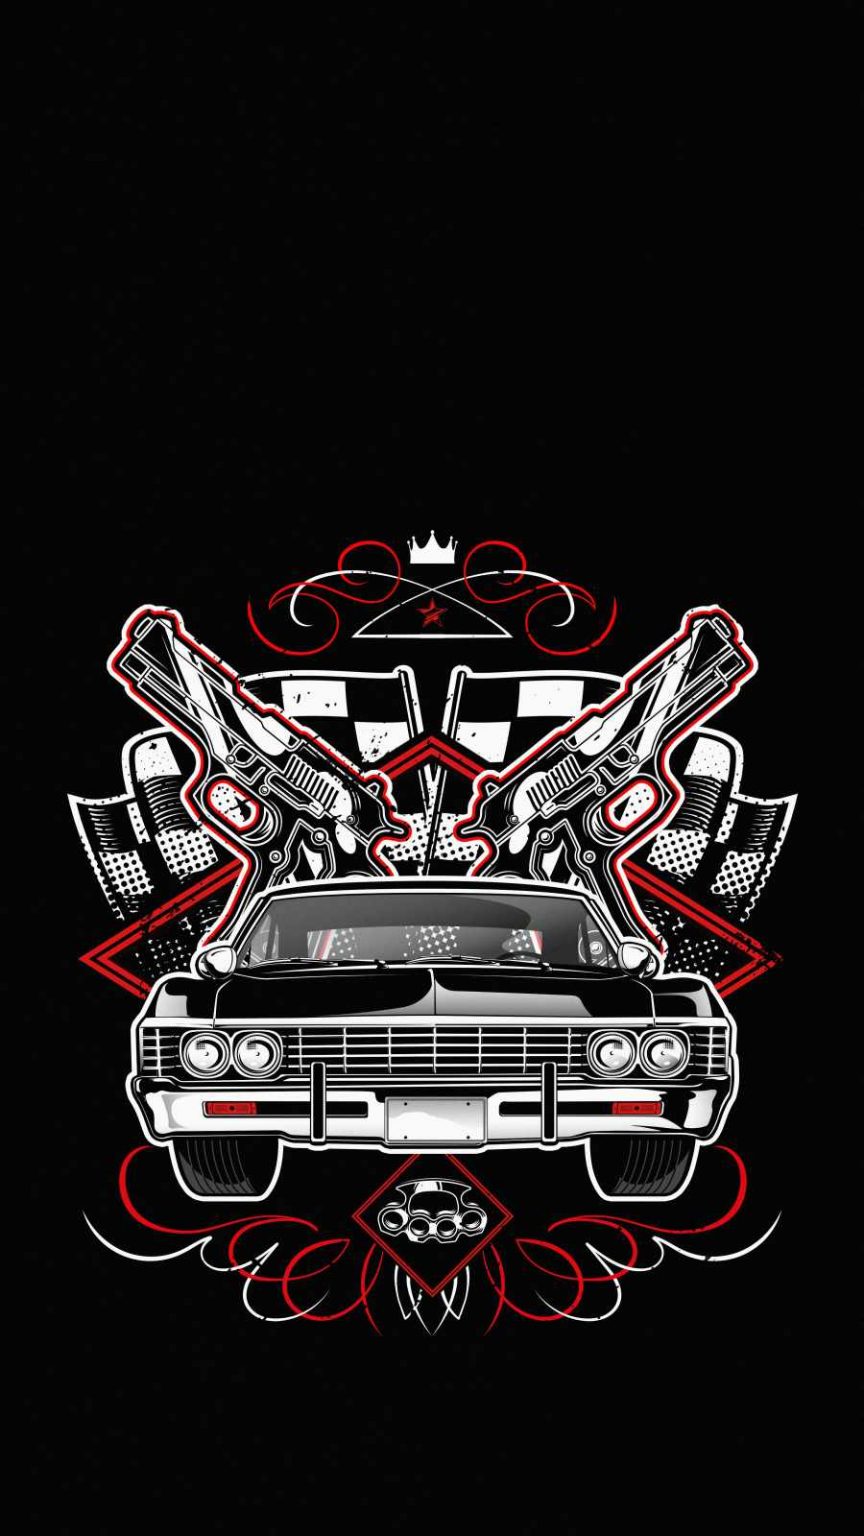 Lowrider Gangster iPhone Wallpaper with 900x1600 Resolution.